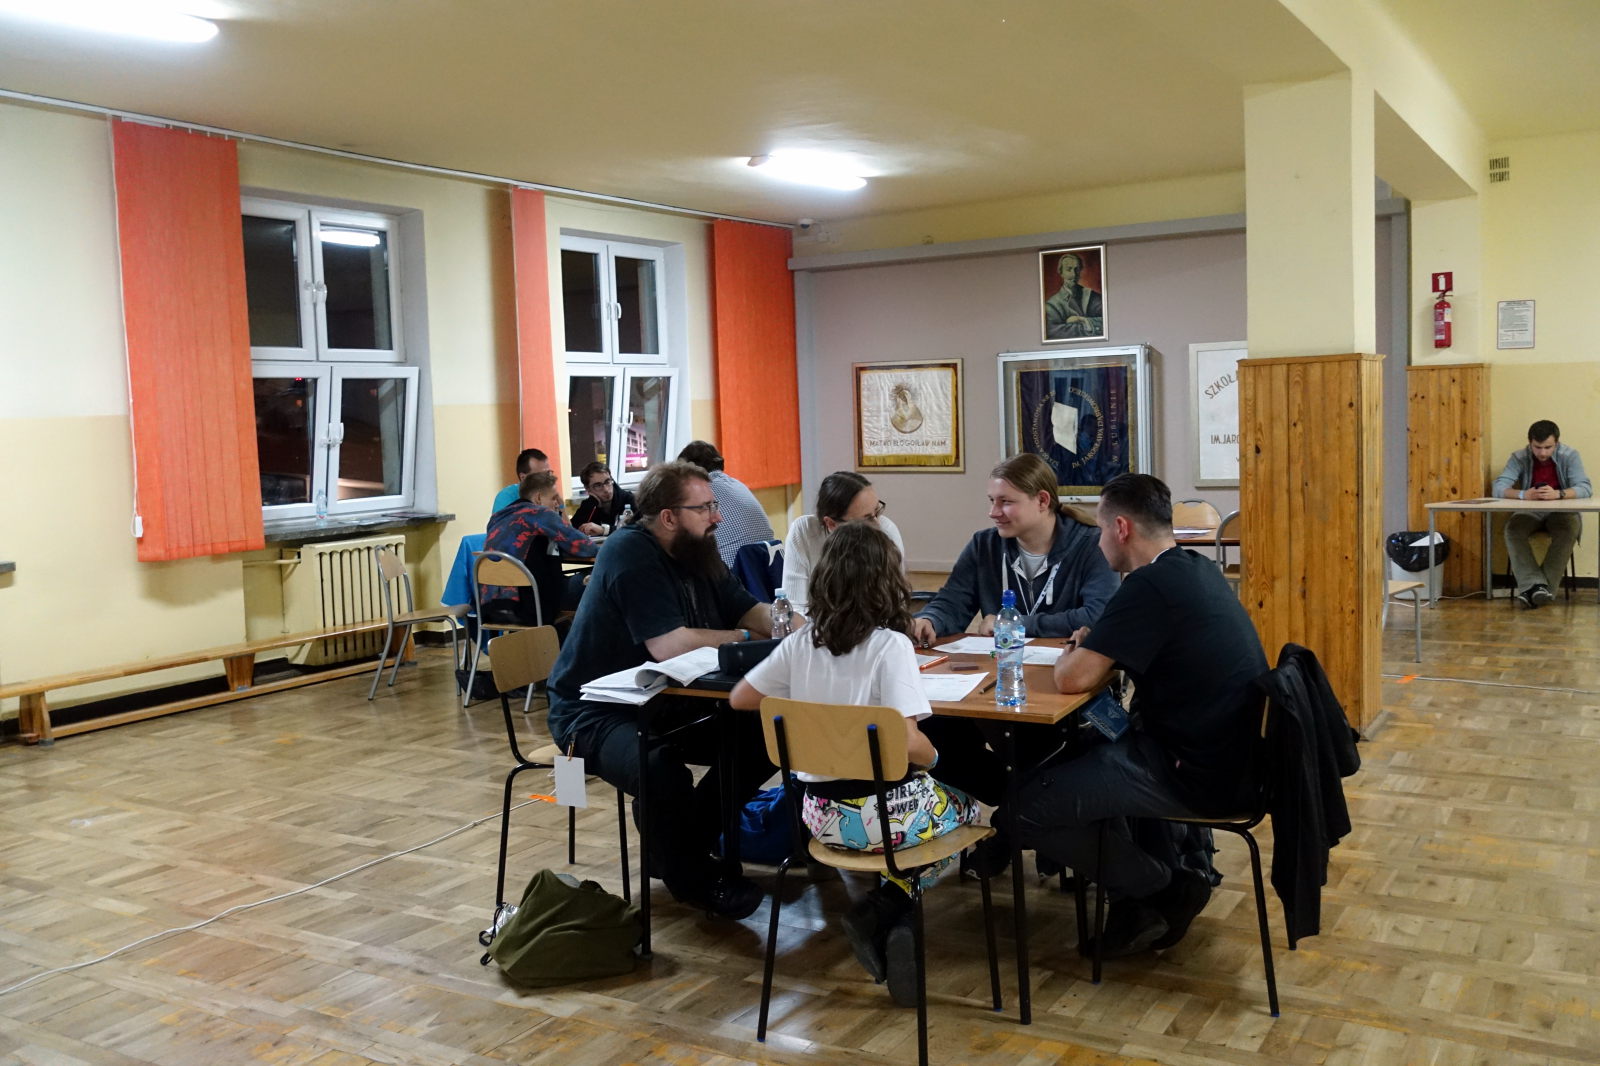 A group of people sitting around a table and playing RPG.